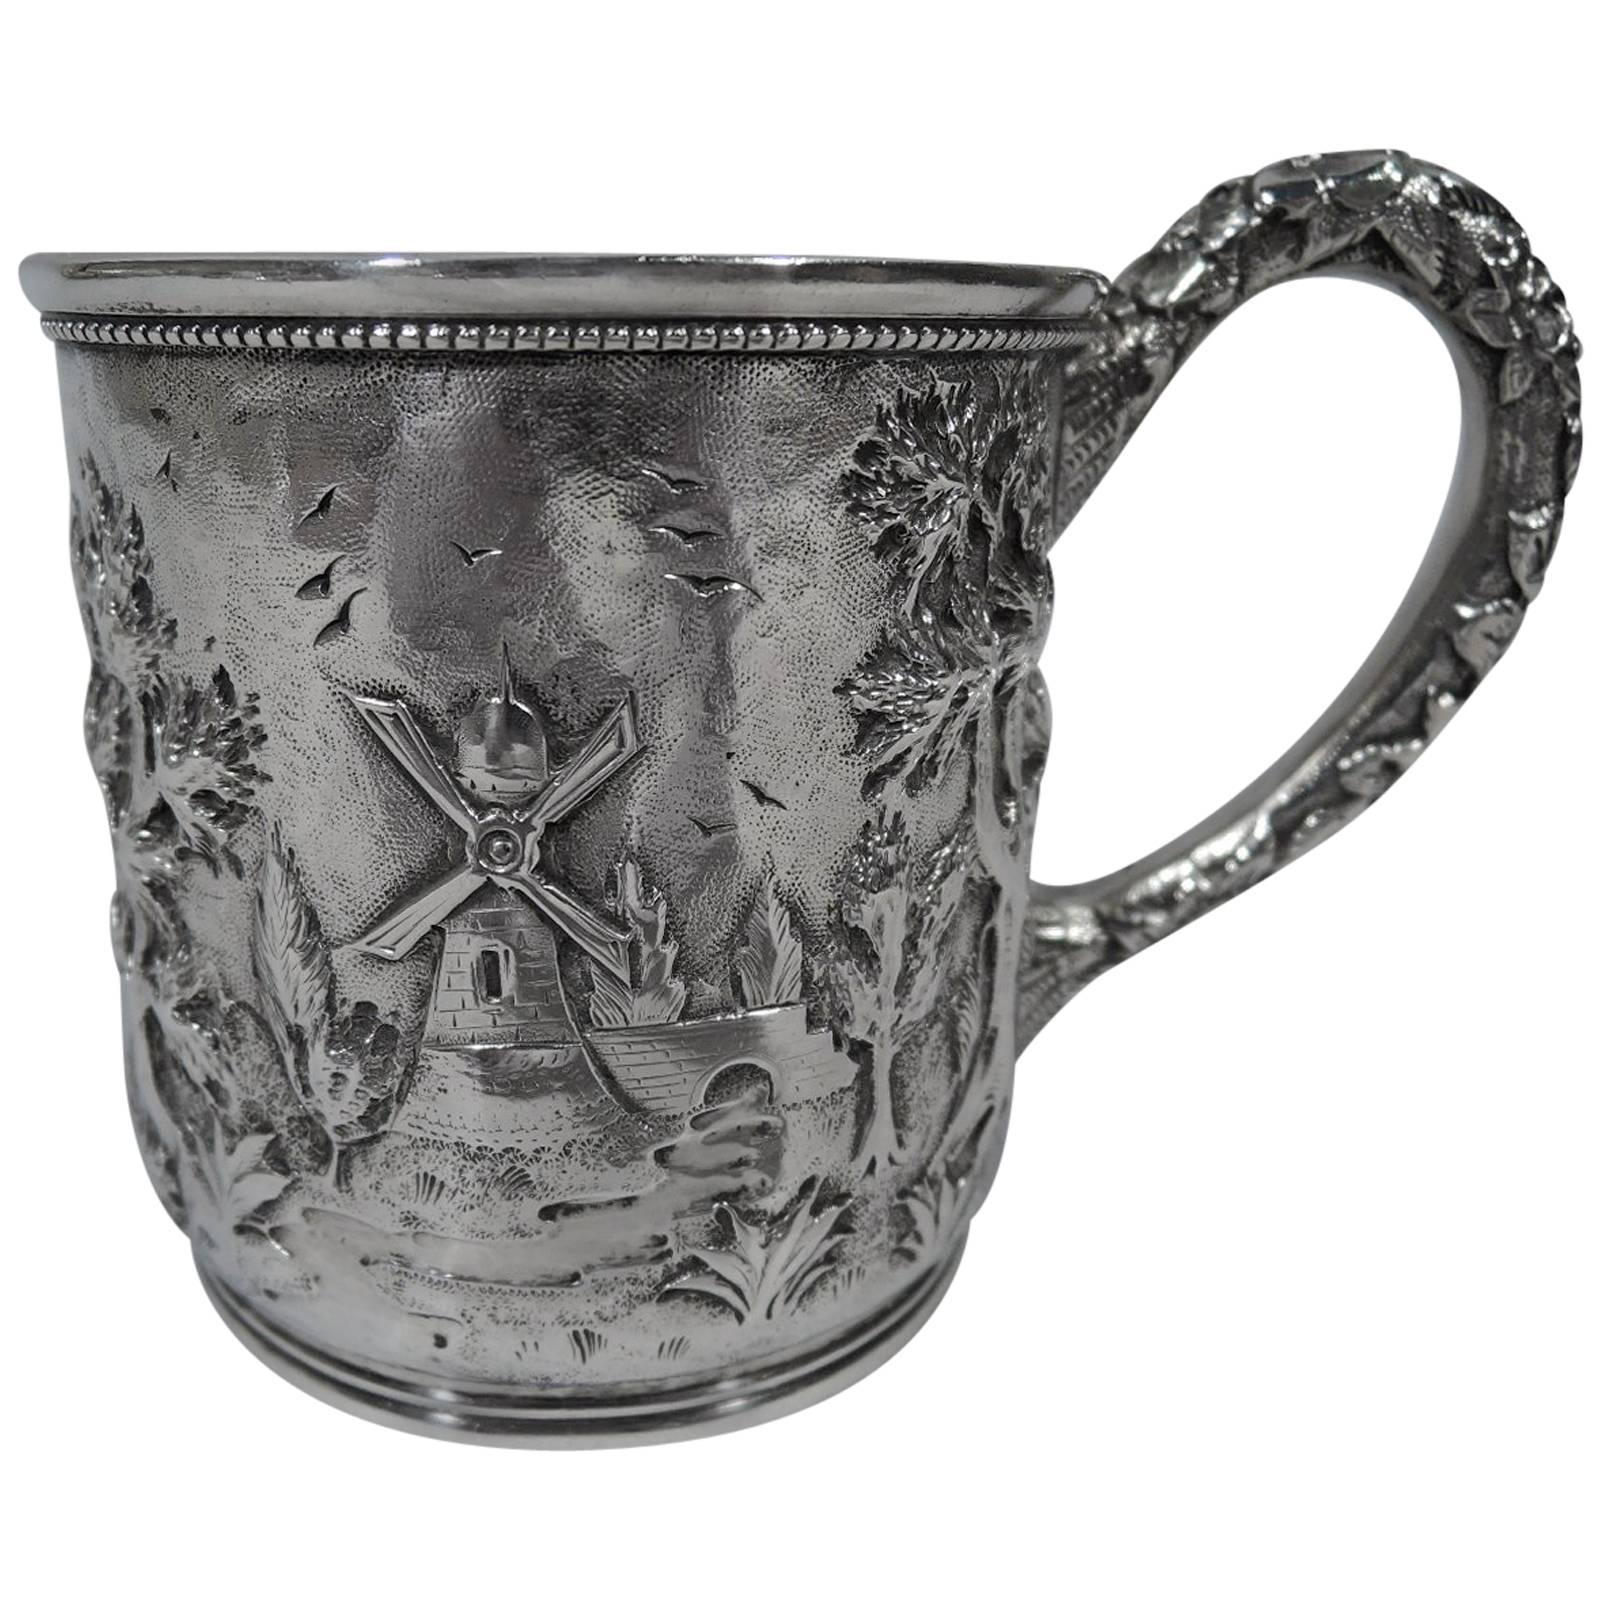 Antique Baltimore Sterling Silver Baby Cup with Pastoral Landscape